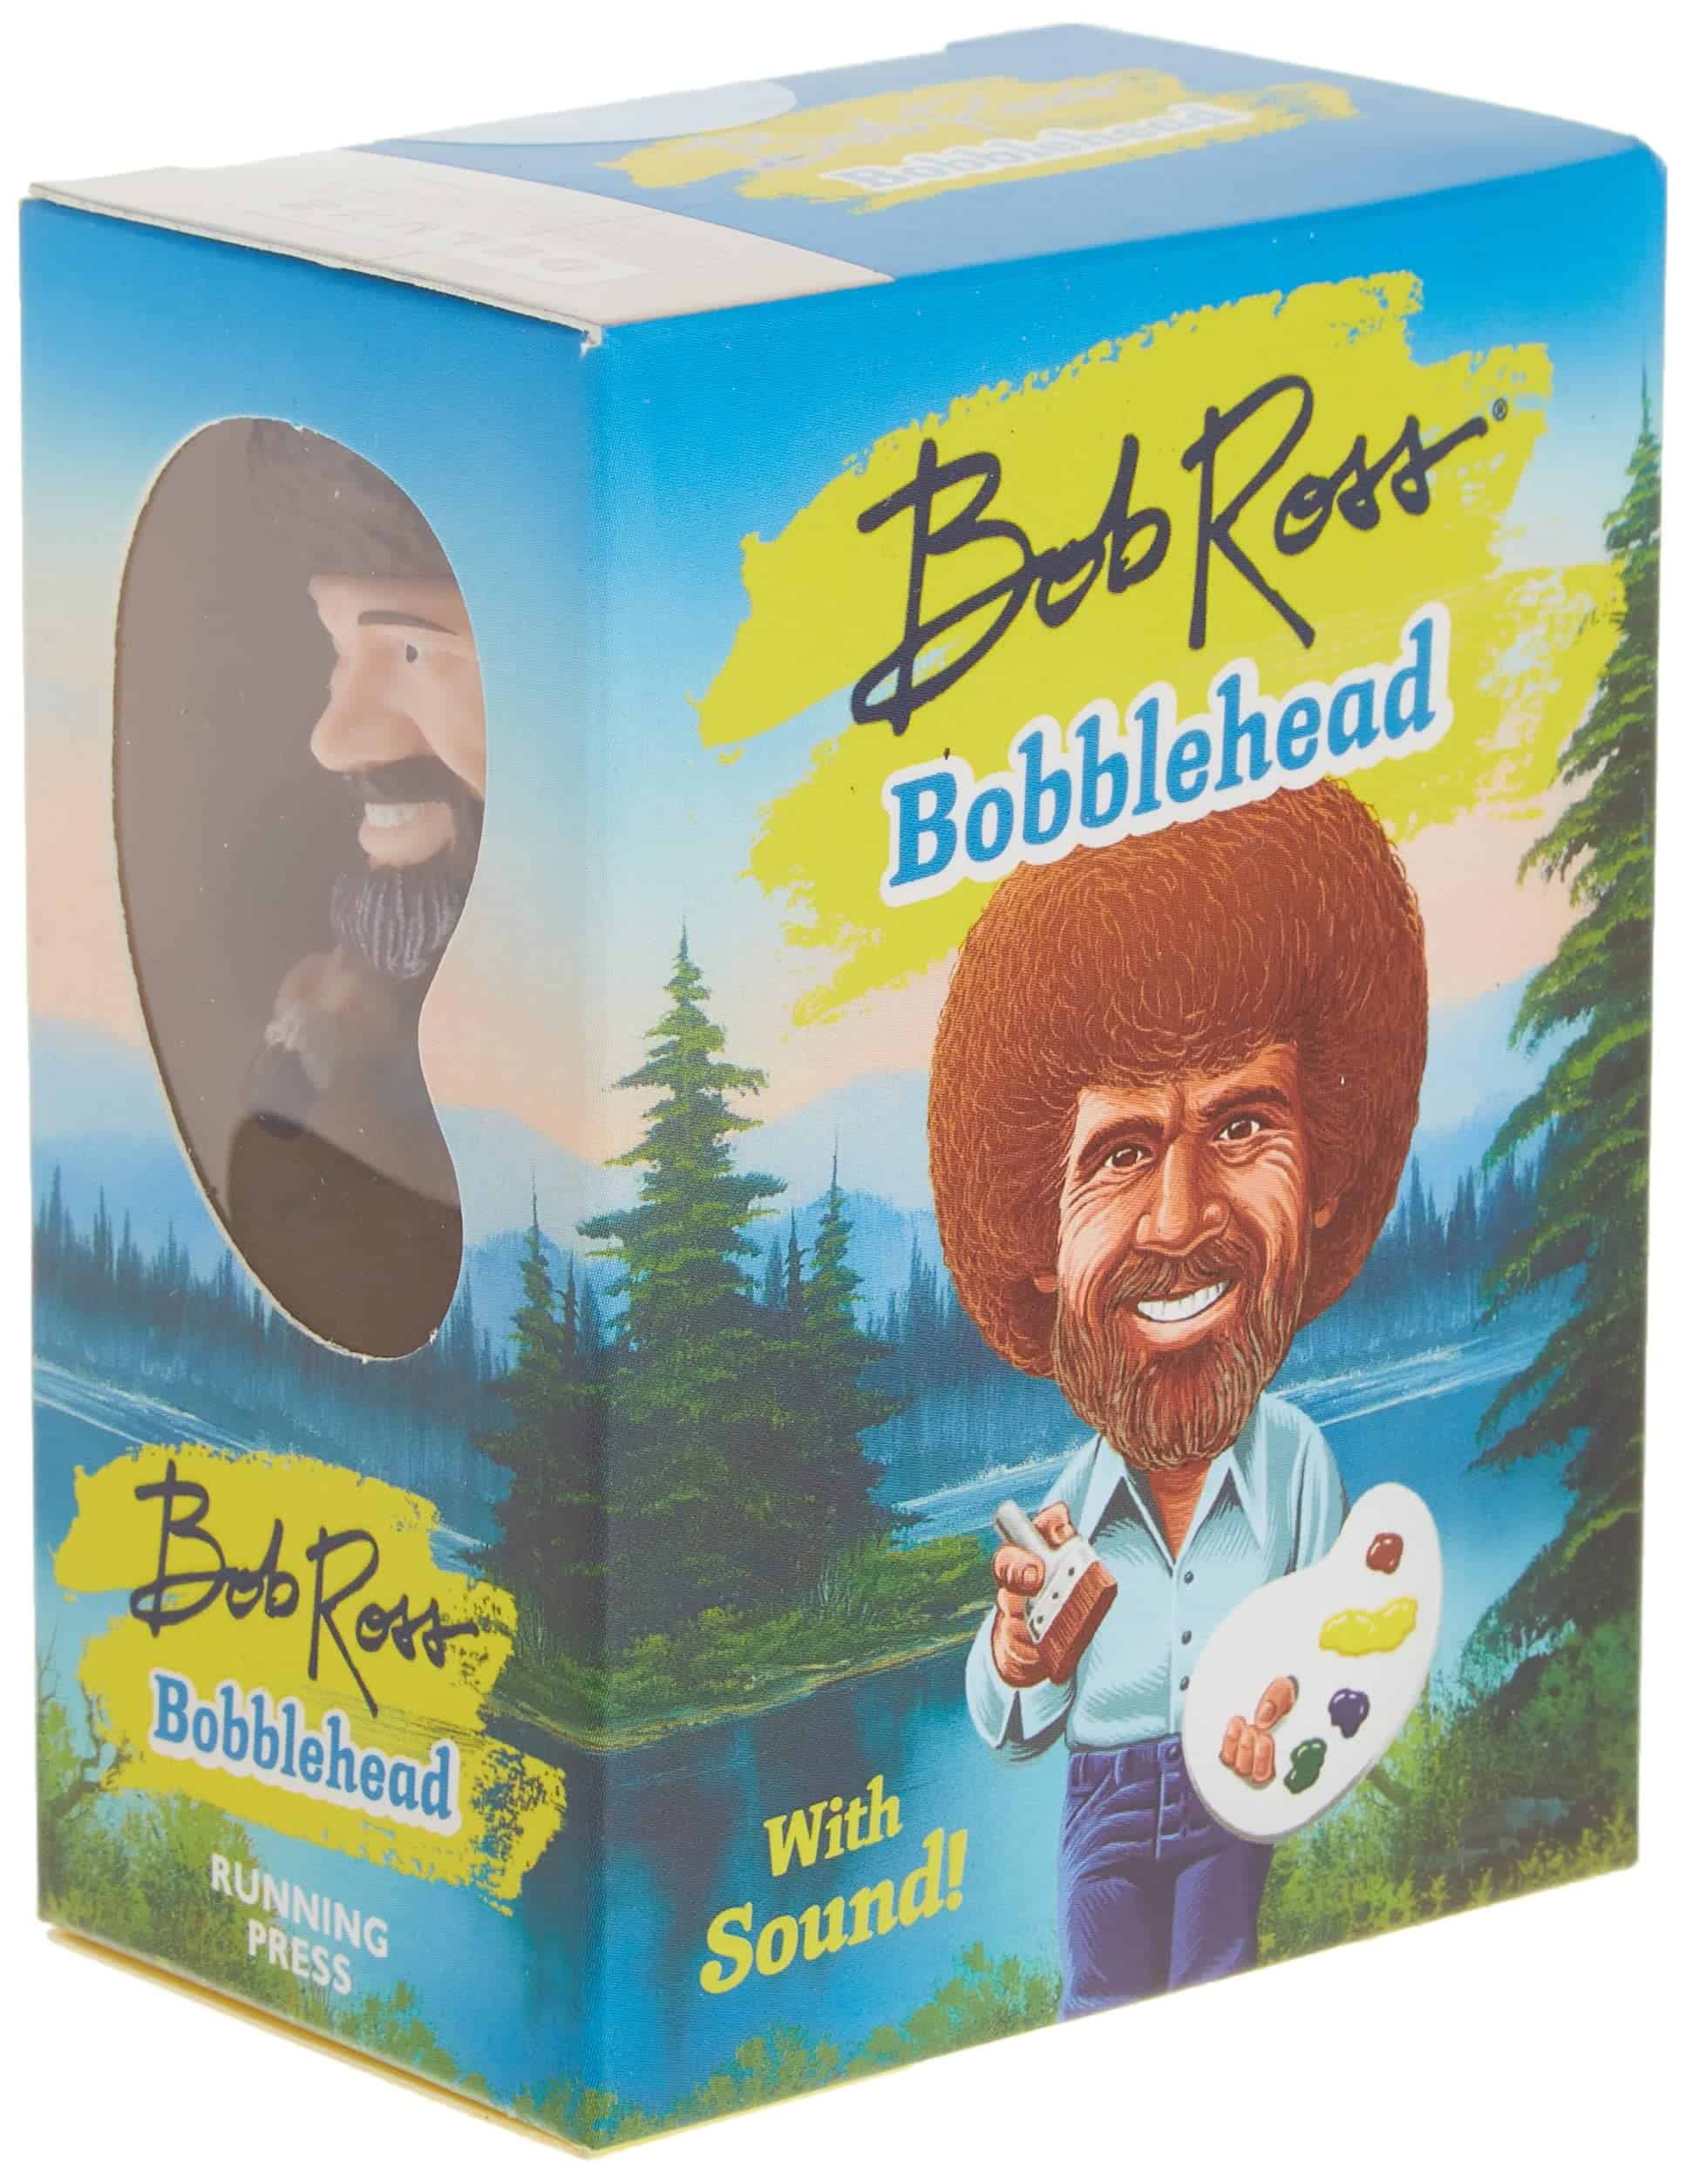 Bob Ross Bobblehead, Gift Ideas for Coworkers 